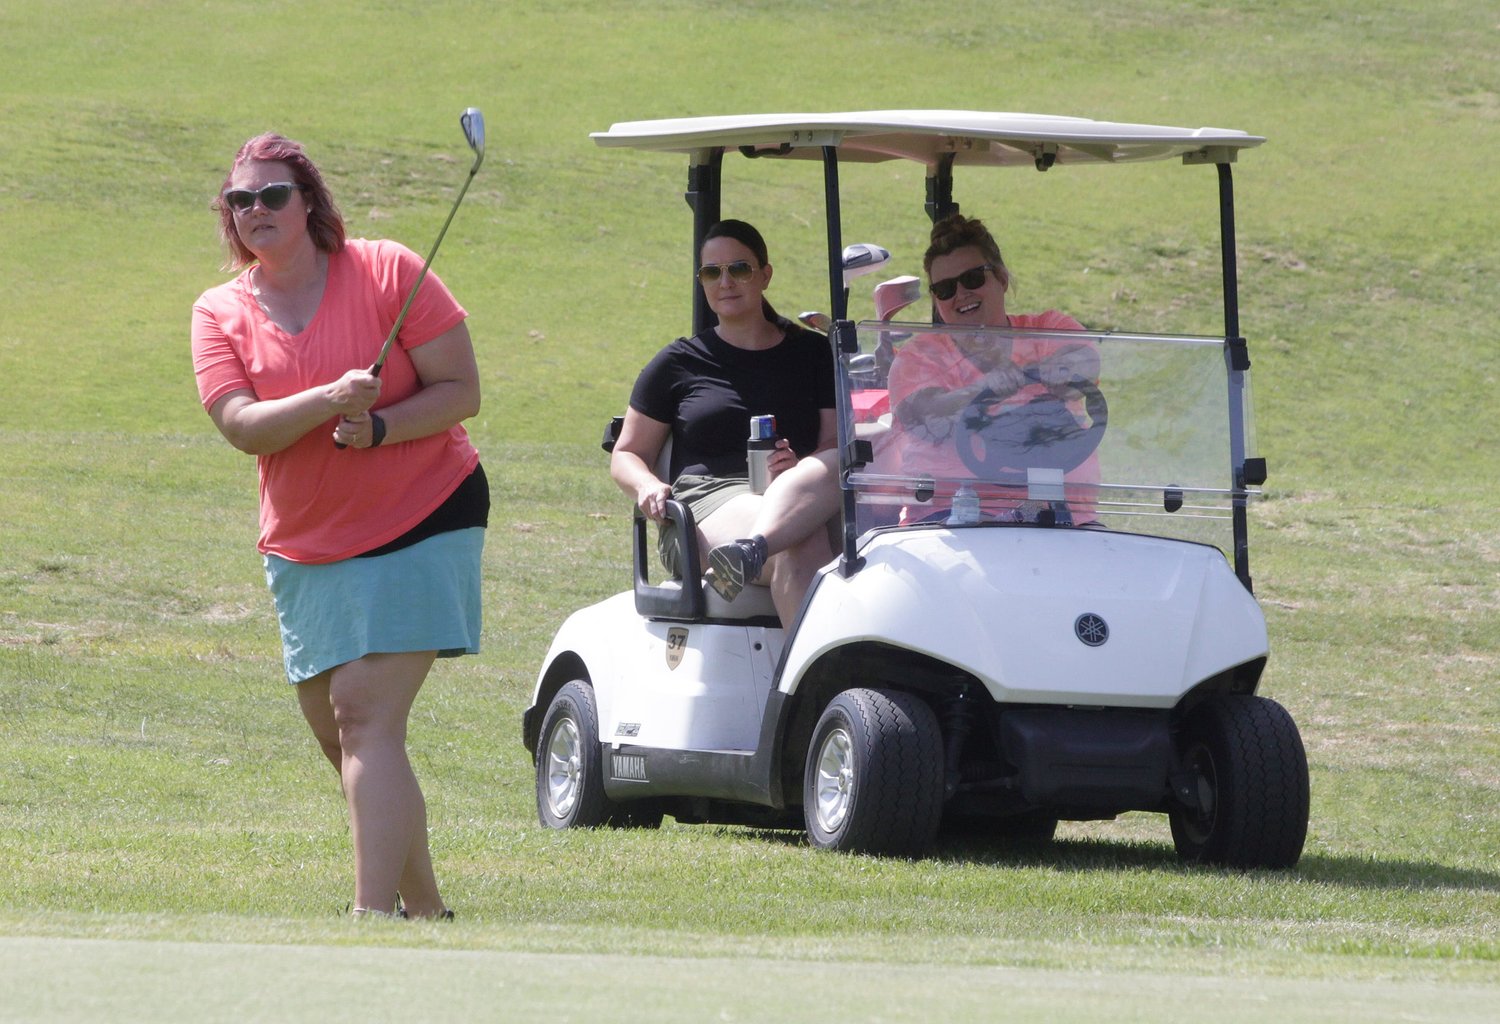 Angela Rash and Megan Jones sit in a golf cart as they watch Danielle Lindsey chip the golf ball onto the green at hole no. 2 as they participate in the Peak Sport &amp; Spine Chipp-in For Kids Golf Tournament held June 8 at Heritage Hills Golf Course in Moberly. The event raised more than $4,200 that was divided among several school district's athletic depart,ents located within mid-Missouri.